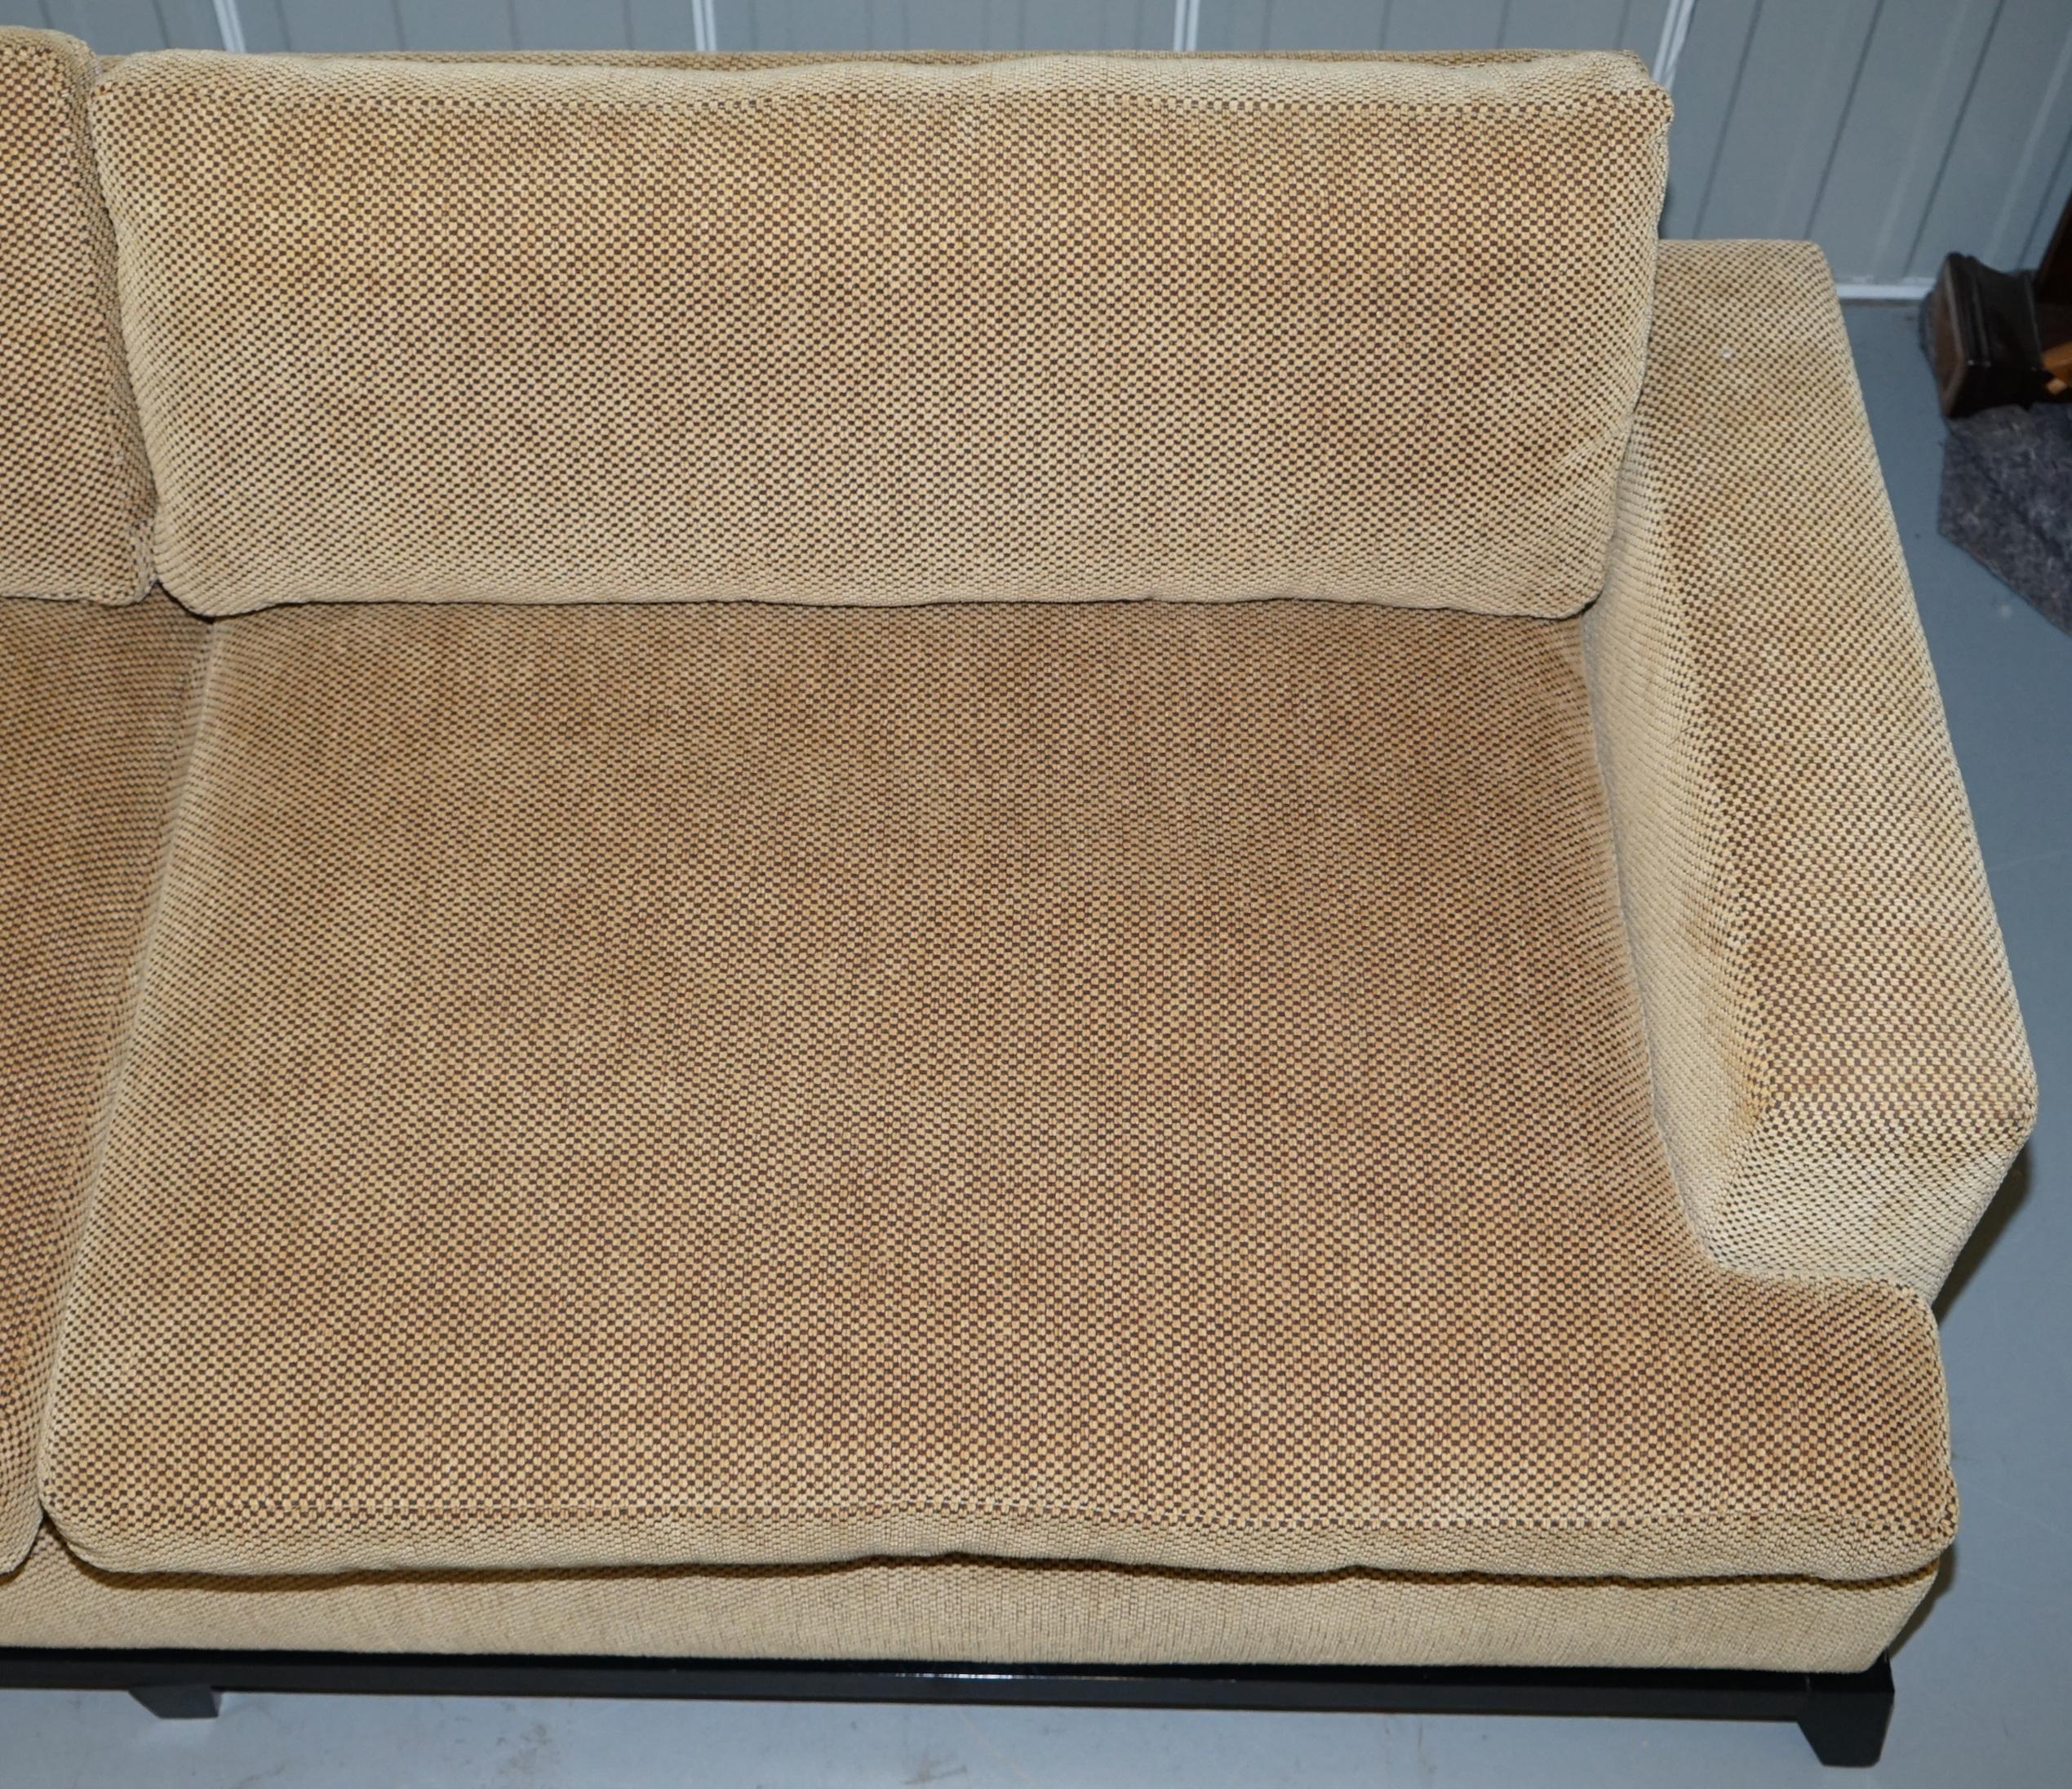 20th Century 1 of 2 George Smith Signature Square Arm Sofa Feather Filled Cushions